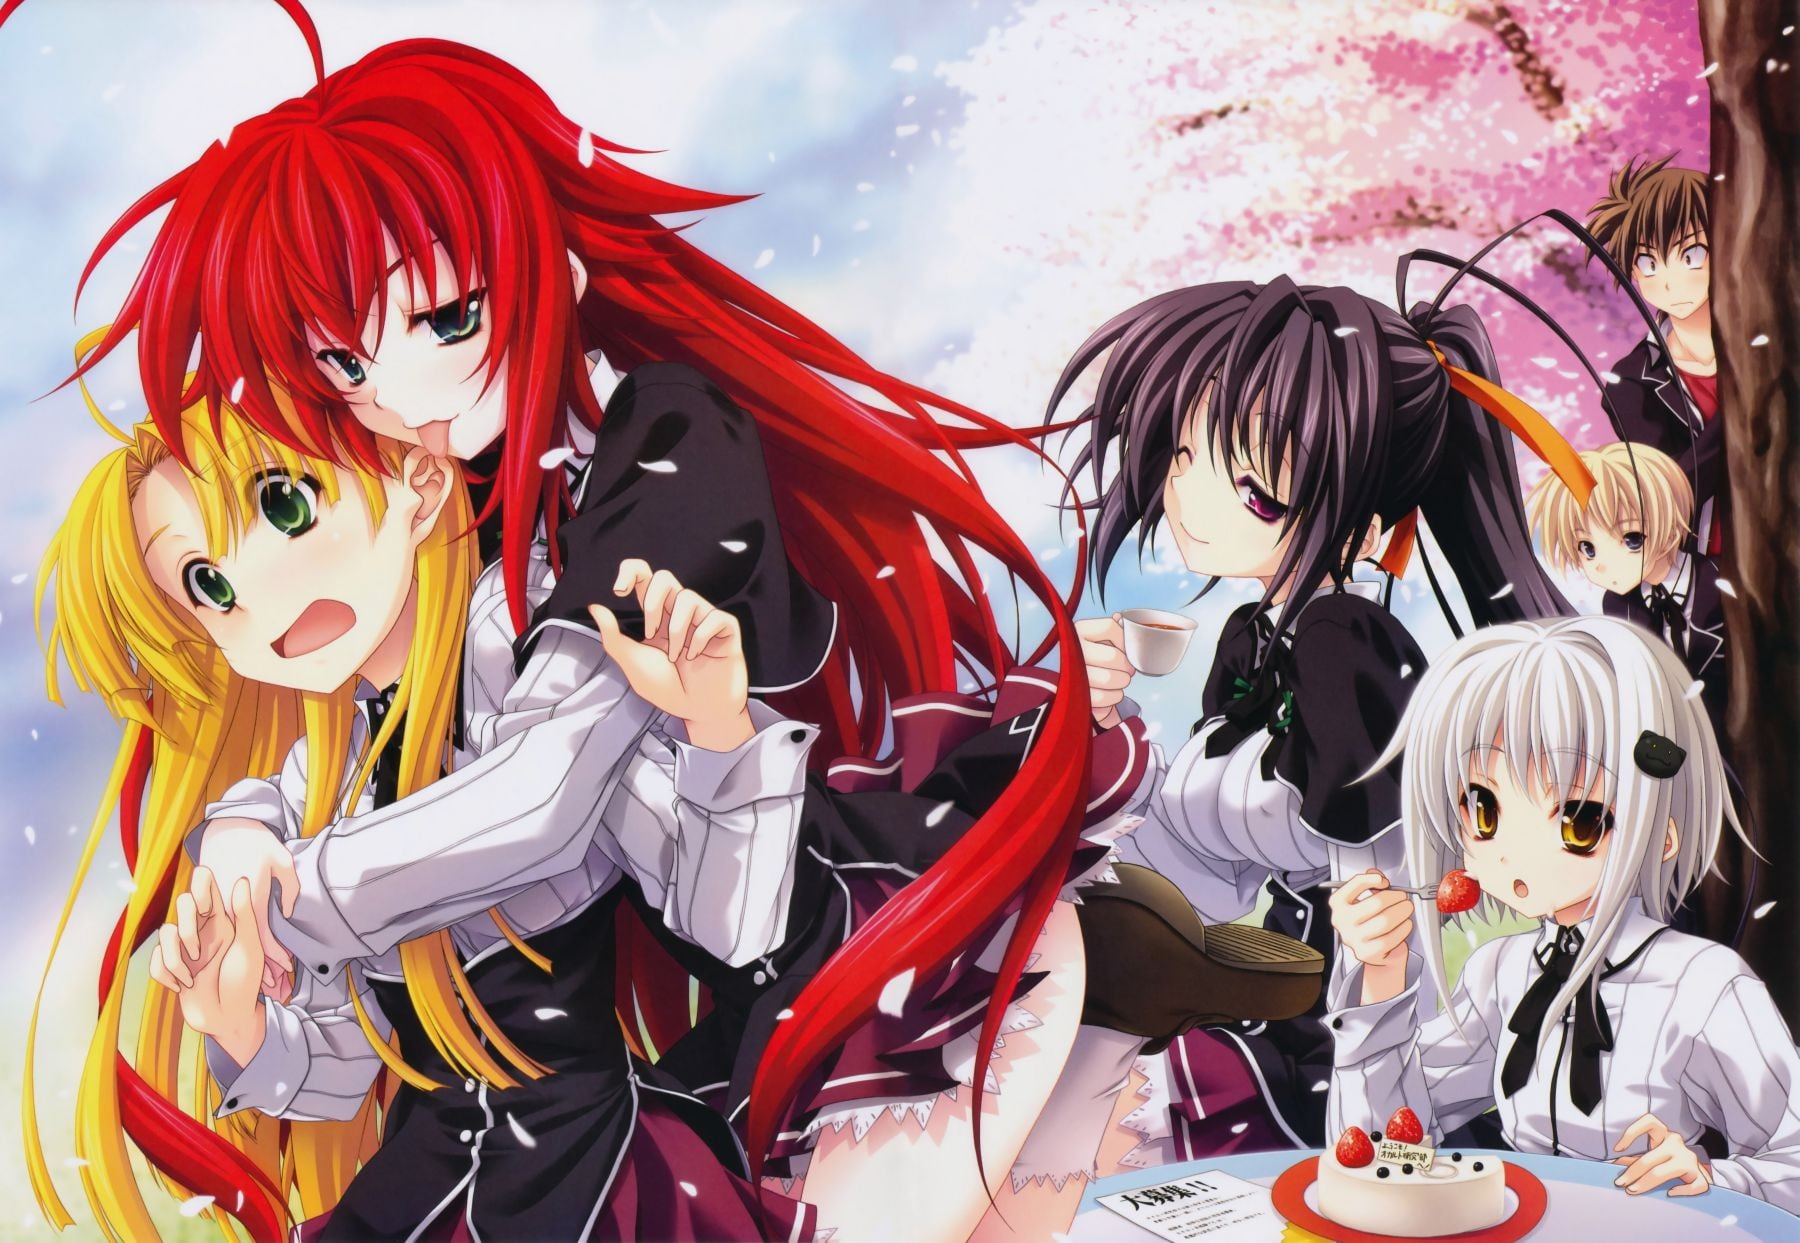 5. Rias Gremory from High School DxD - wide 1